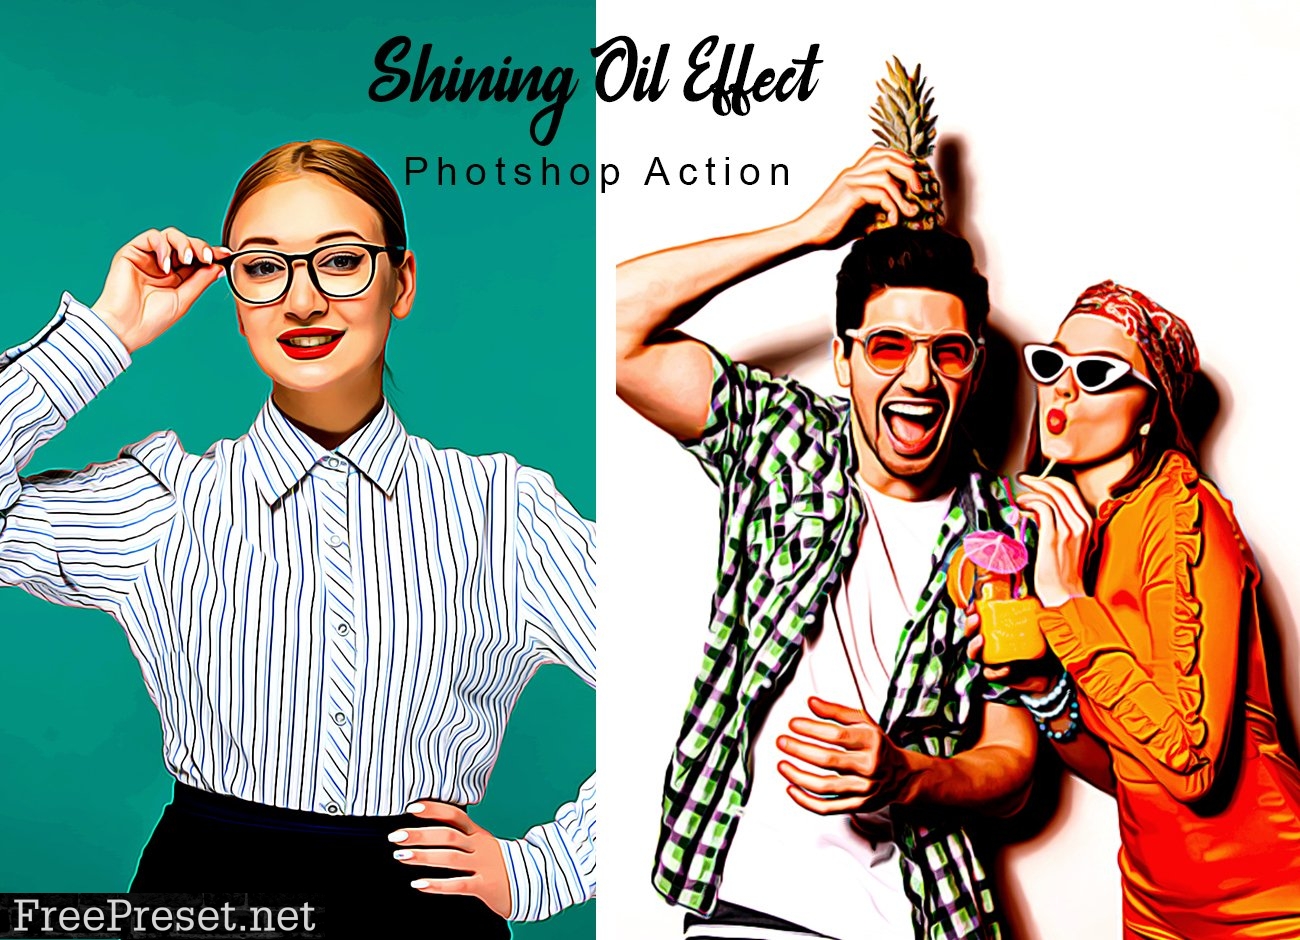 Shining Oil Effect Photoshop Action 7516920